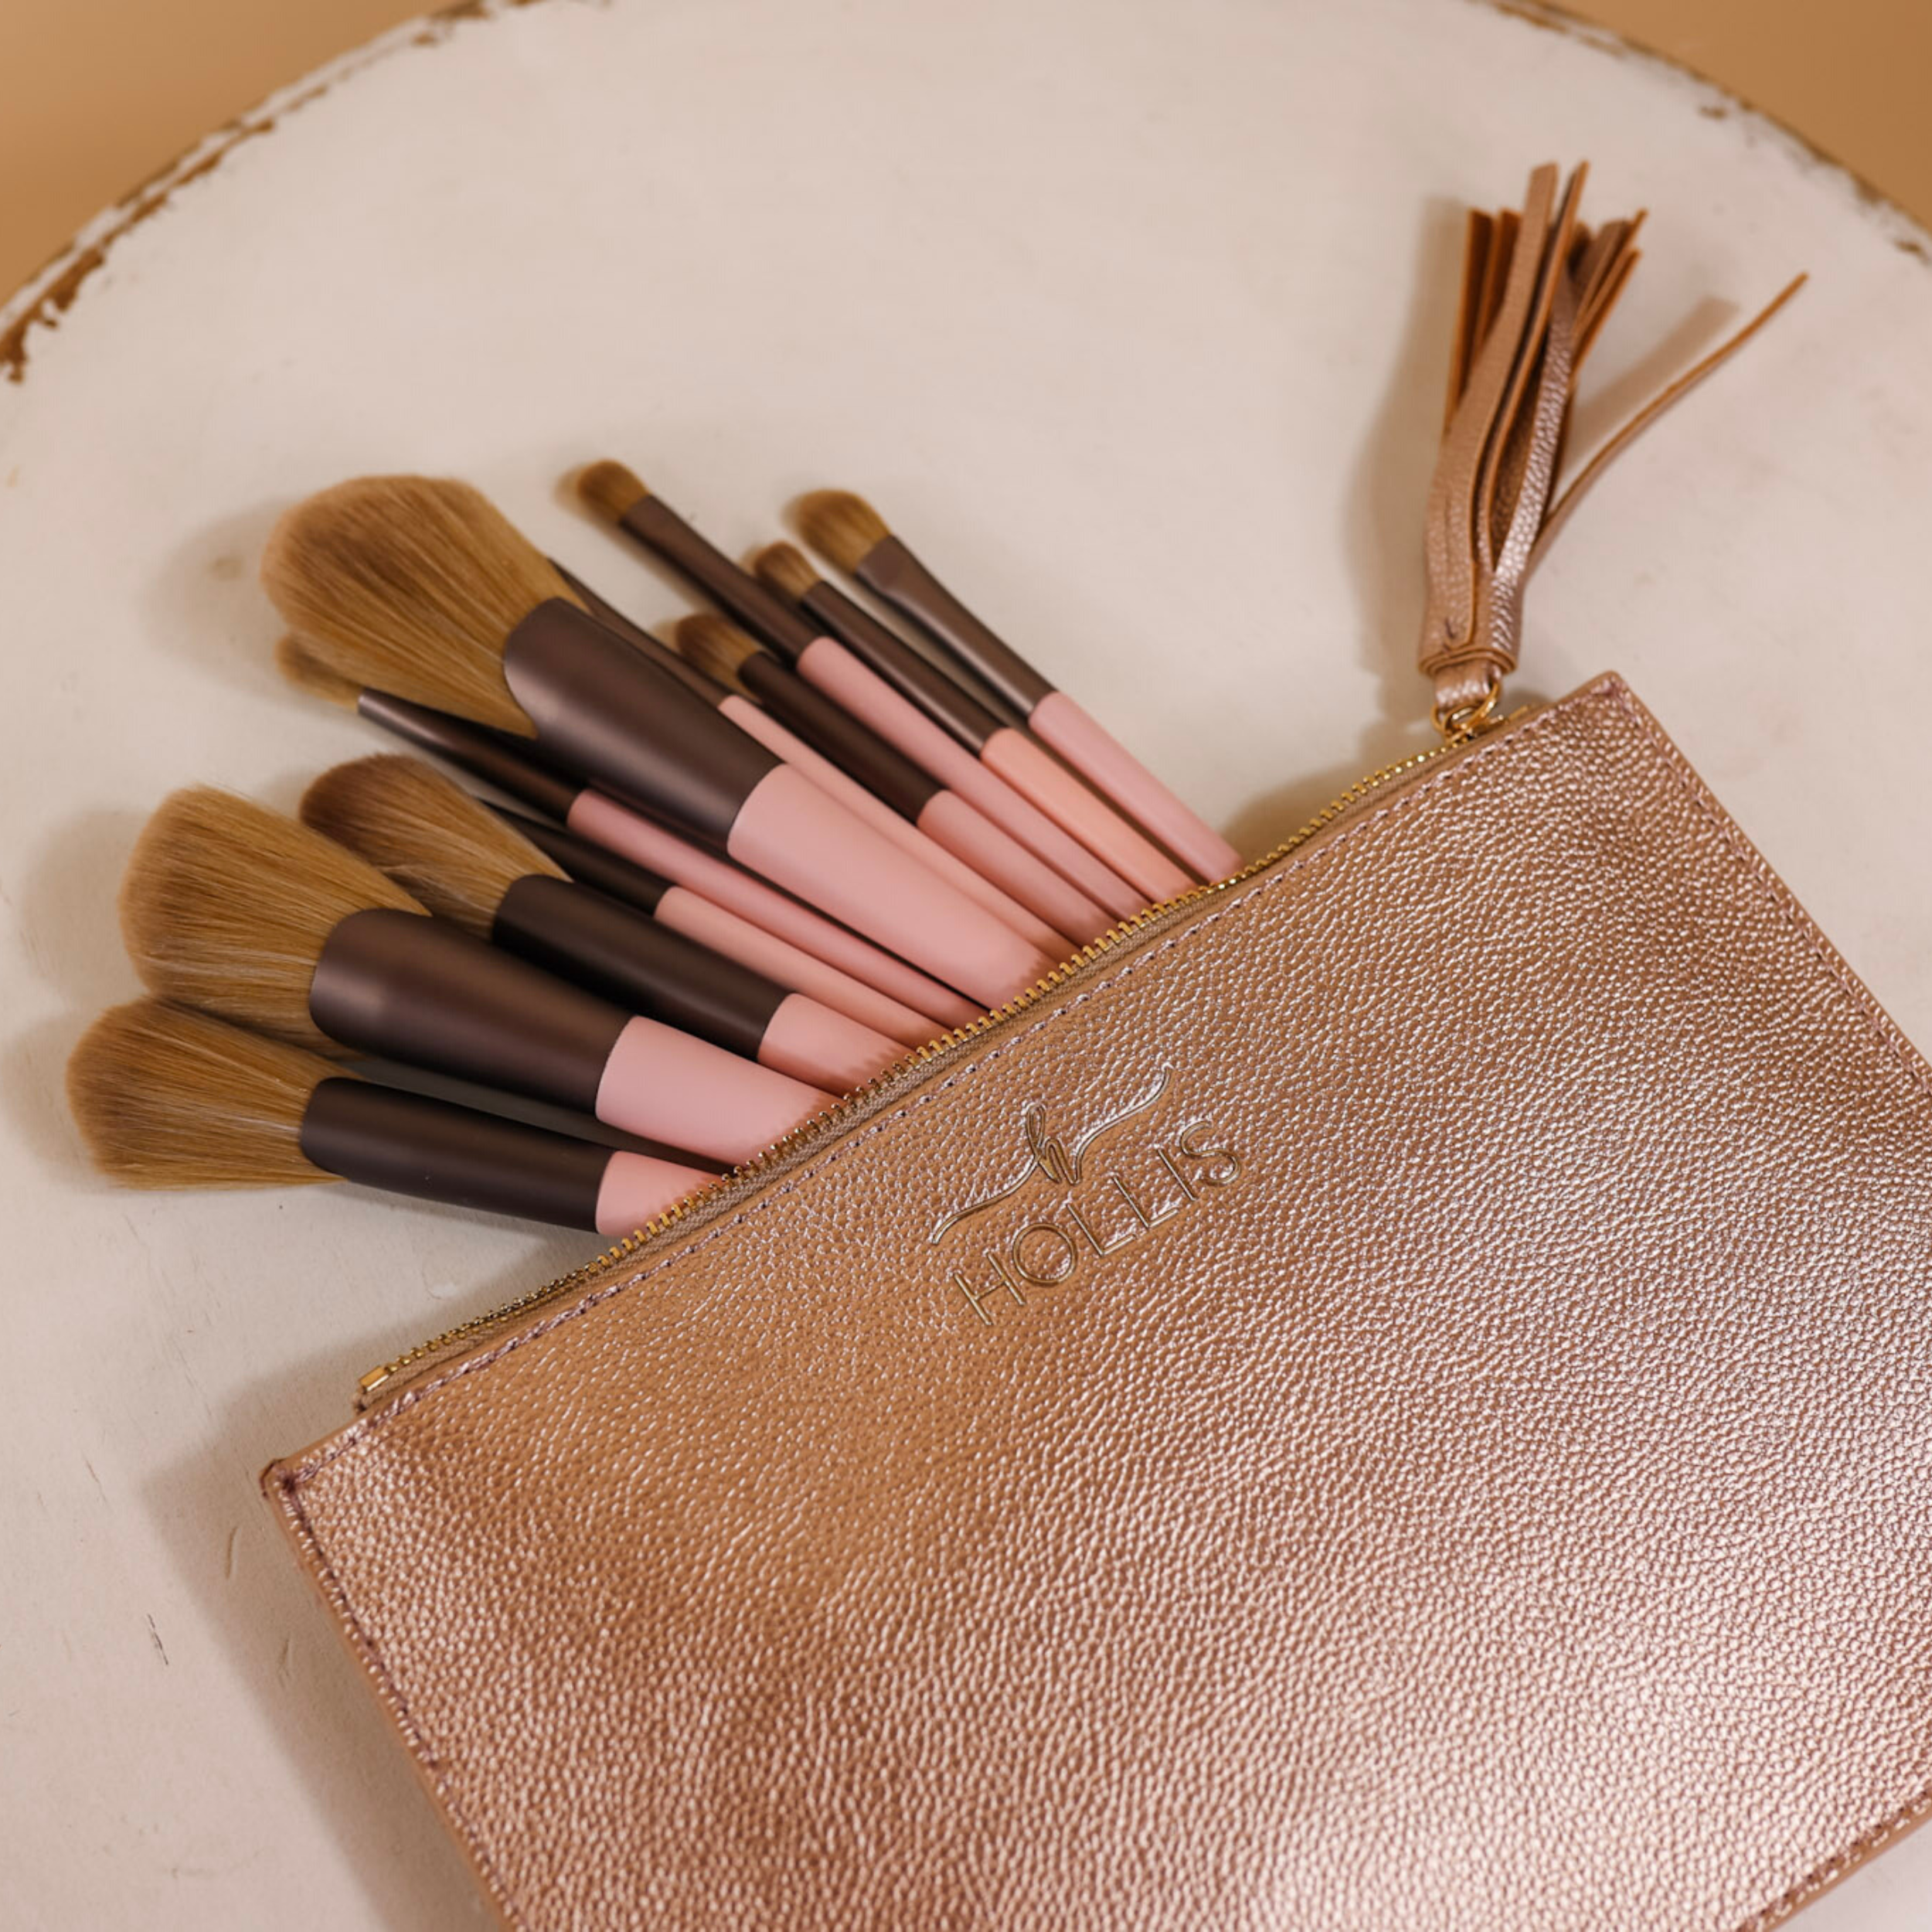 A brush pouch is laid in the middle of the picture in rose gold. Laying inside the pouch are 11 different sized makeup brushes in pink and brown. Background is white. 